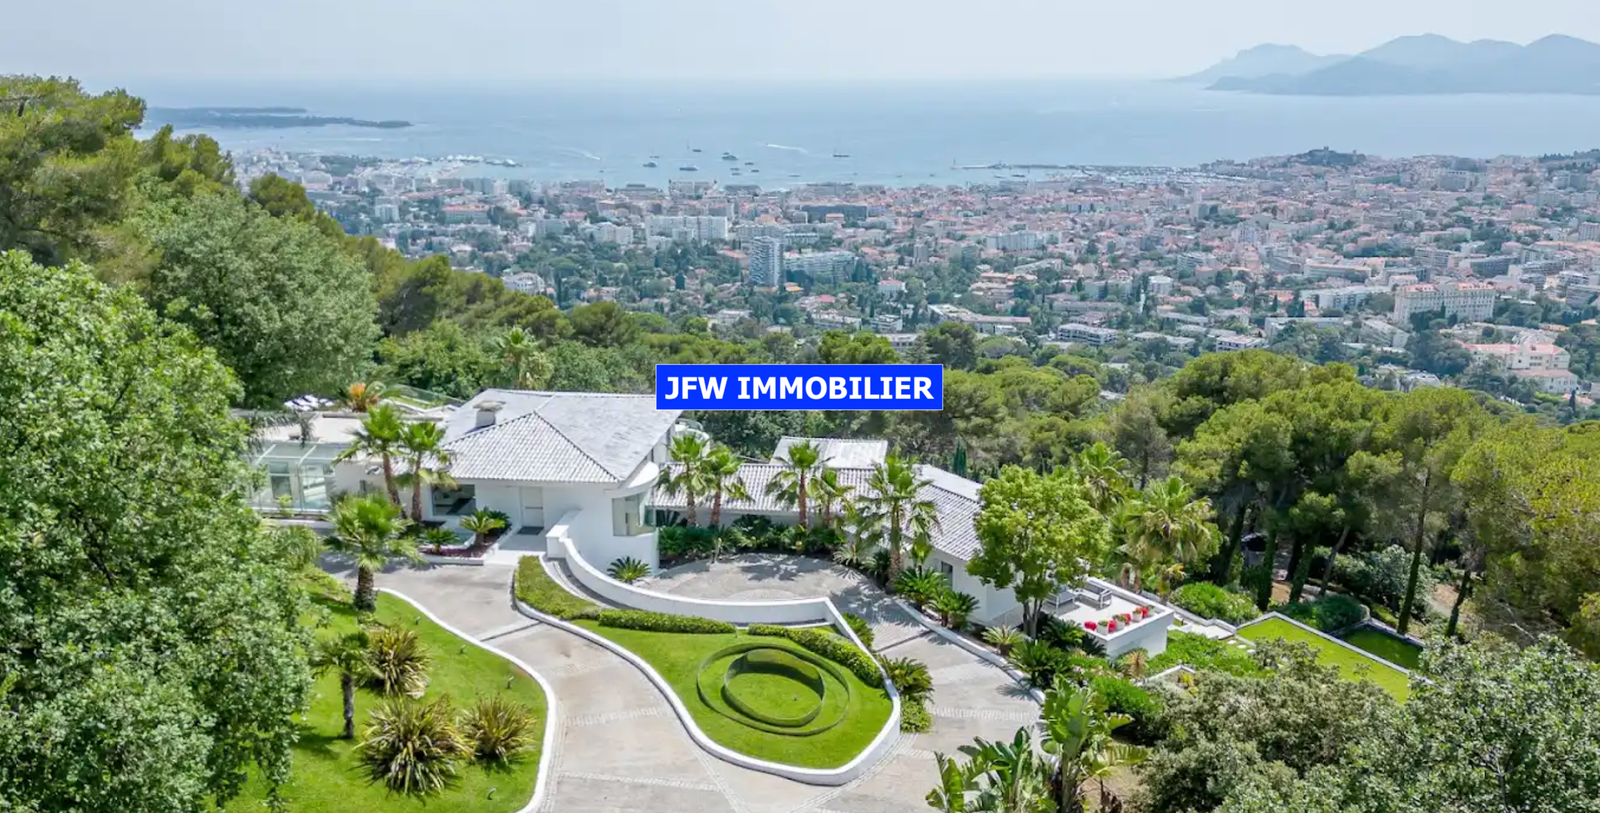 Private modern luxury estate for sale in Cannes French Riviera France